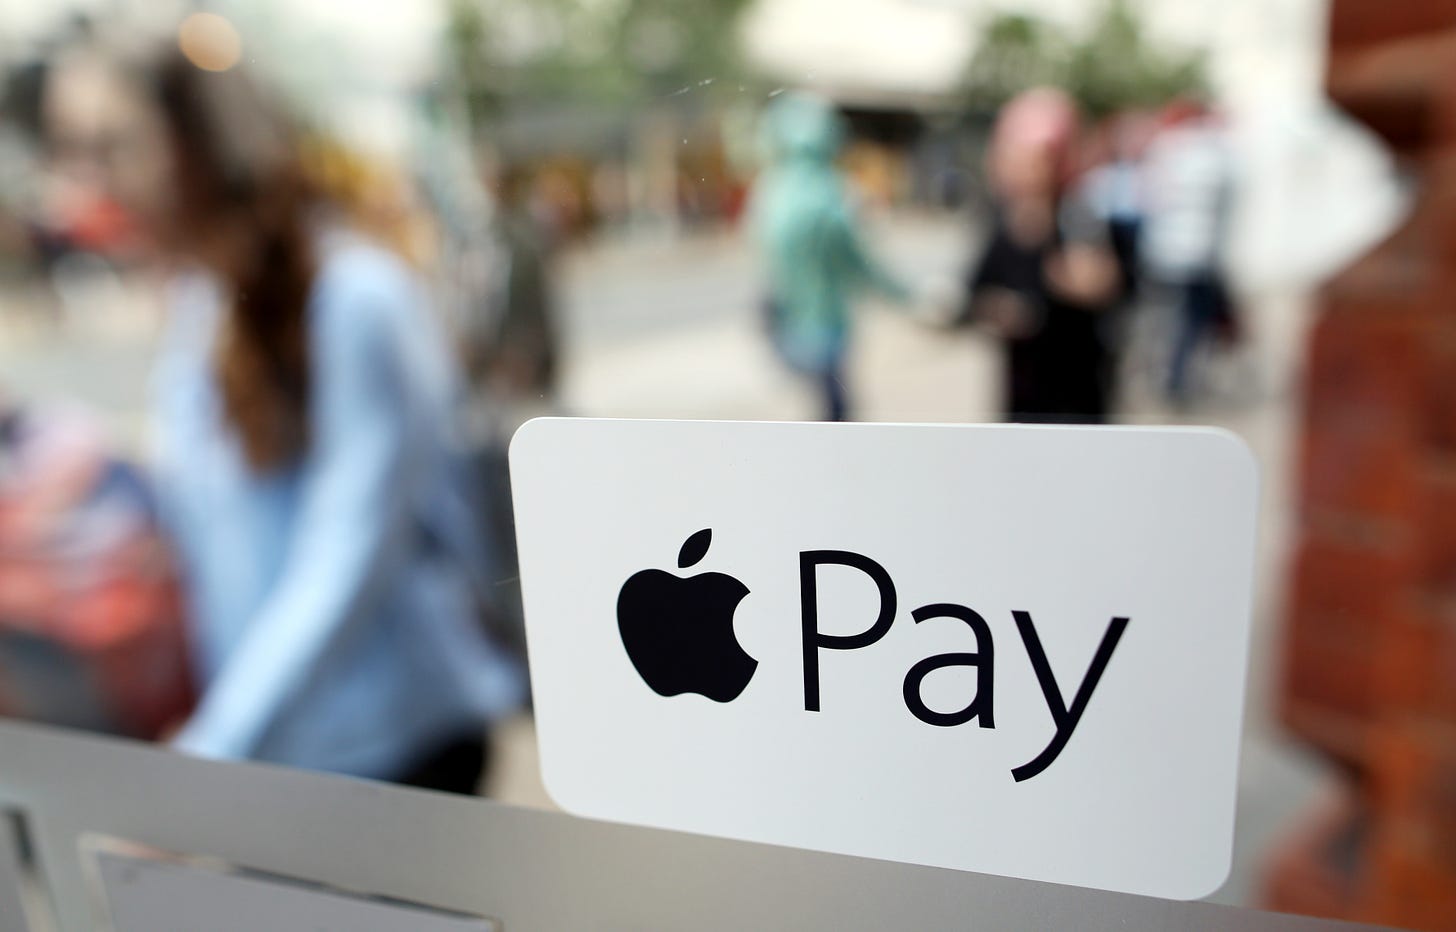 In September, the CFPB&nbsp;warned Apple&nbsp;over its policy of requiring iPhone users to funnel all payments through Apple Pay, instead of allowing direct integration with apps such as Venmo.&nbsp;